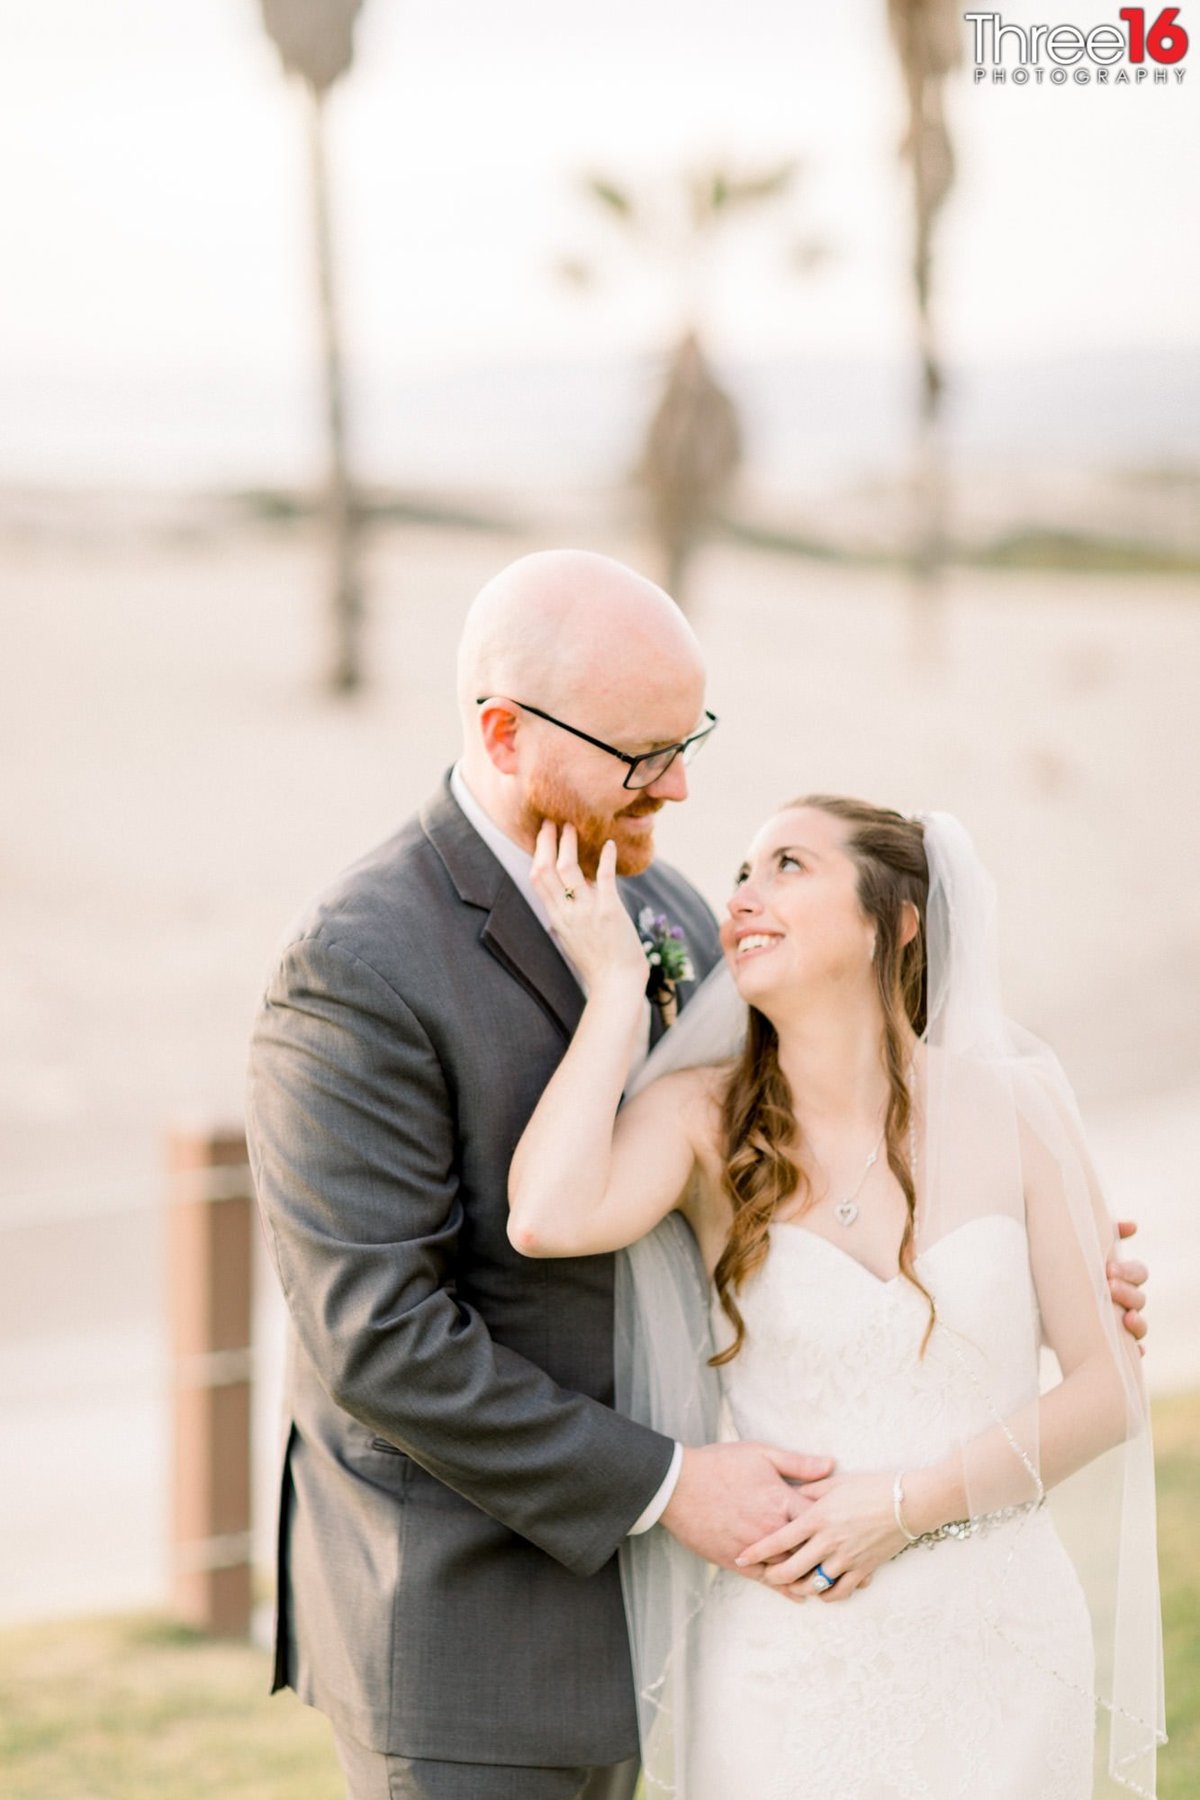 Groom looks down at his Bride as she looks up and smiles while touching his face